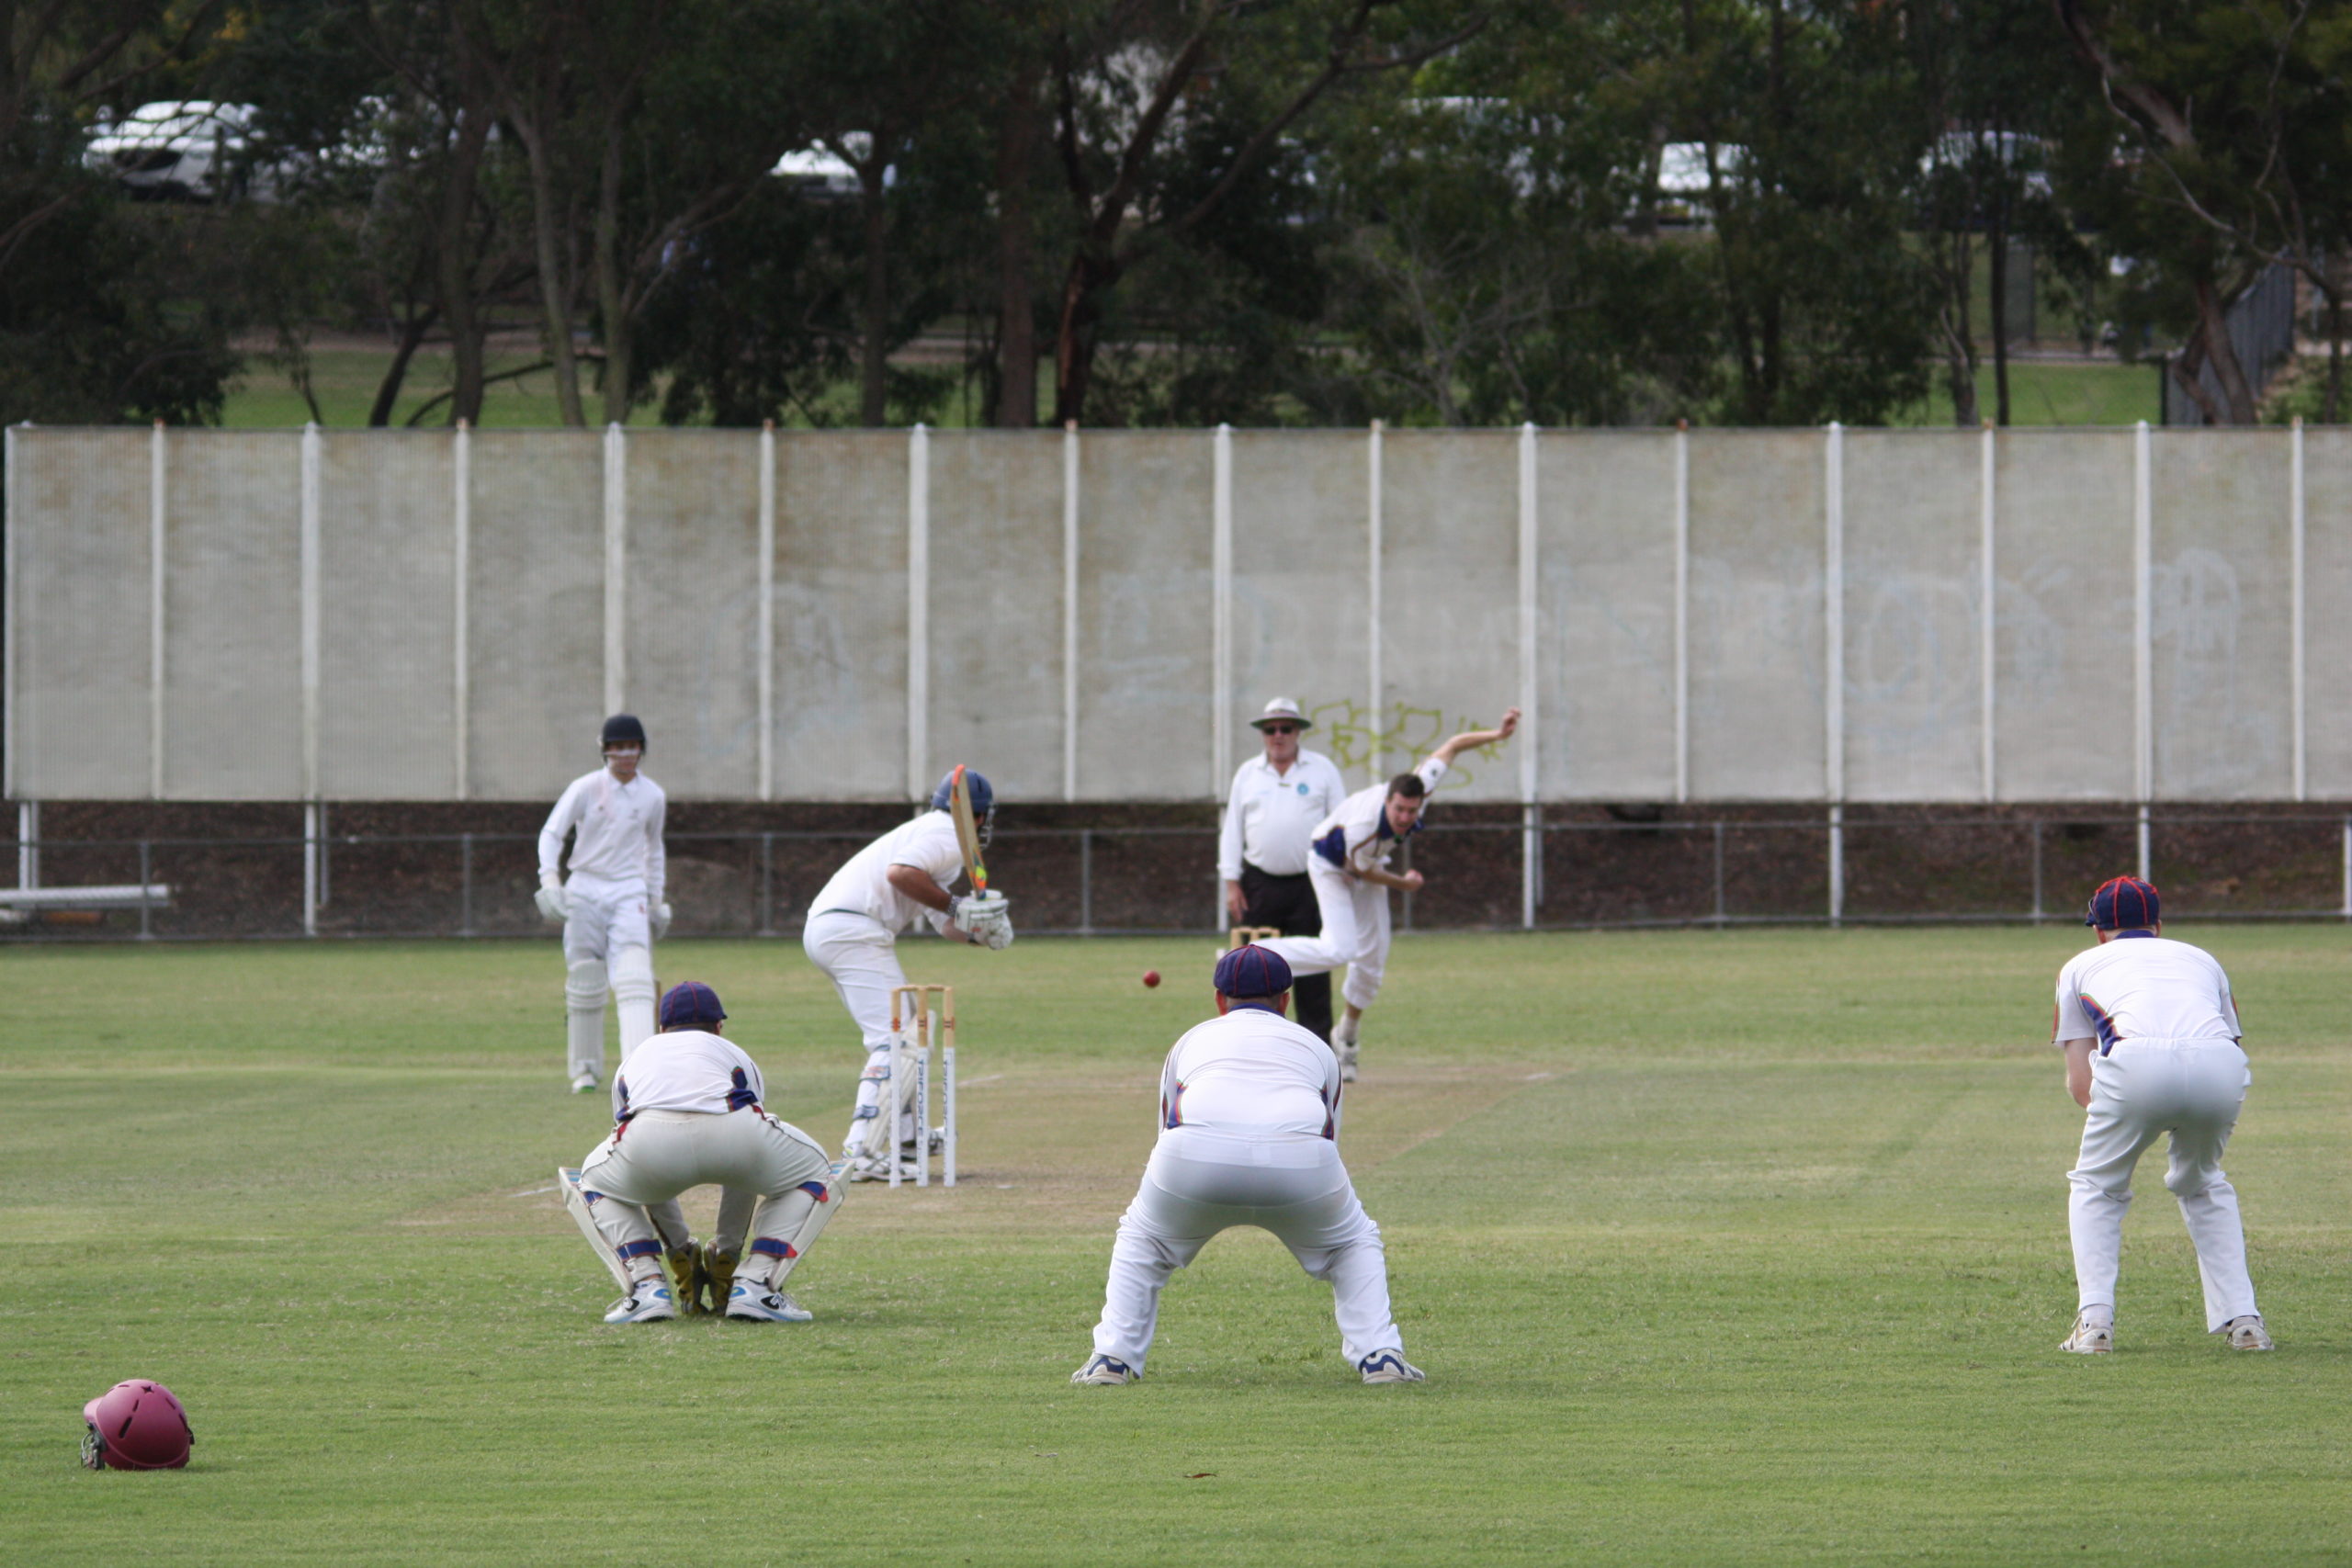 Scott Henderson in the A1 Grand Final (Rofie 4) Vs Berowra - Asquith Oval 28th and 29th March 2015.